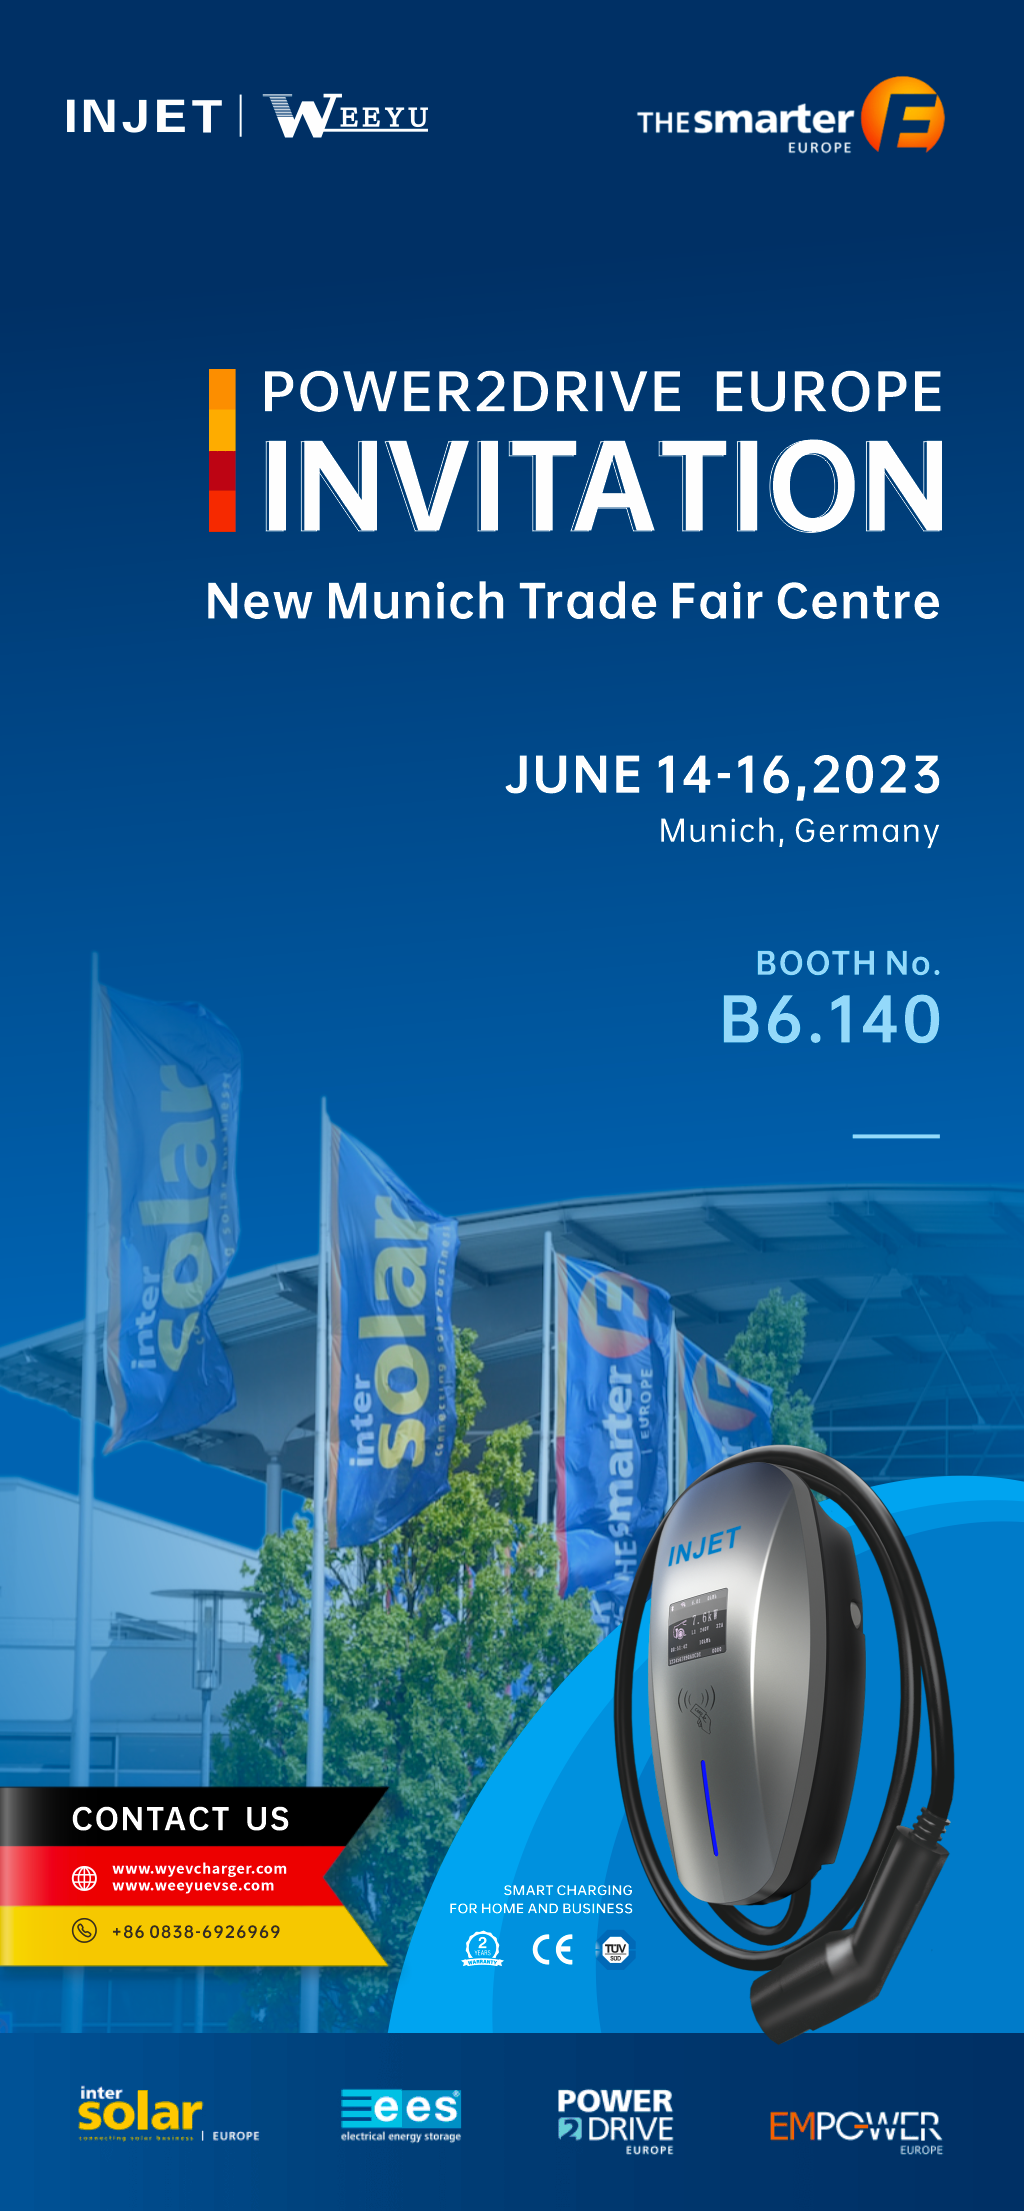 INJET Invites Partners to Visit Booth B6.140 at Power2Drive Europe 2023 in Munich